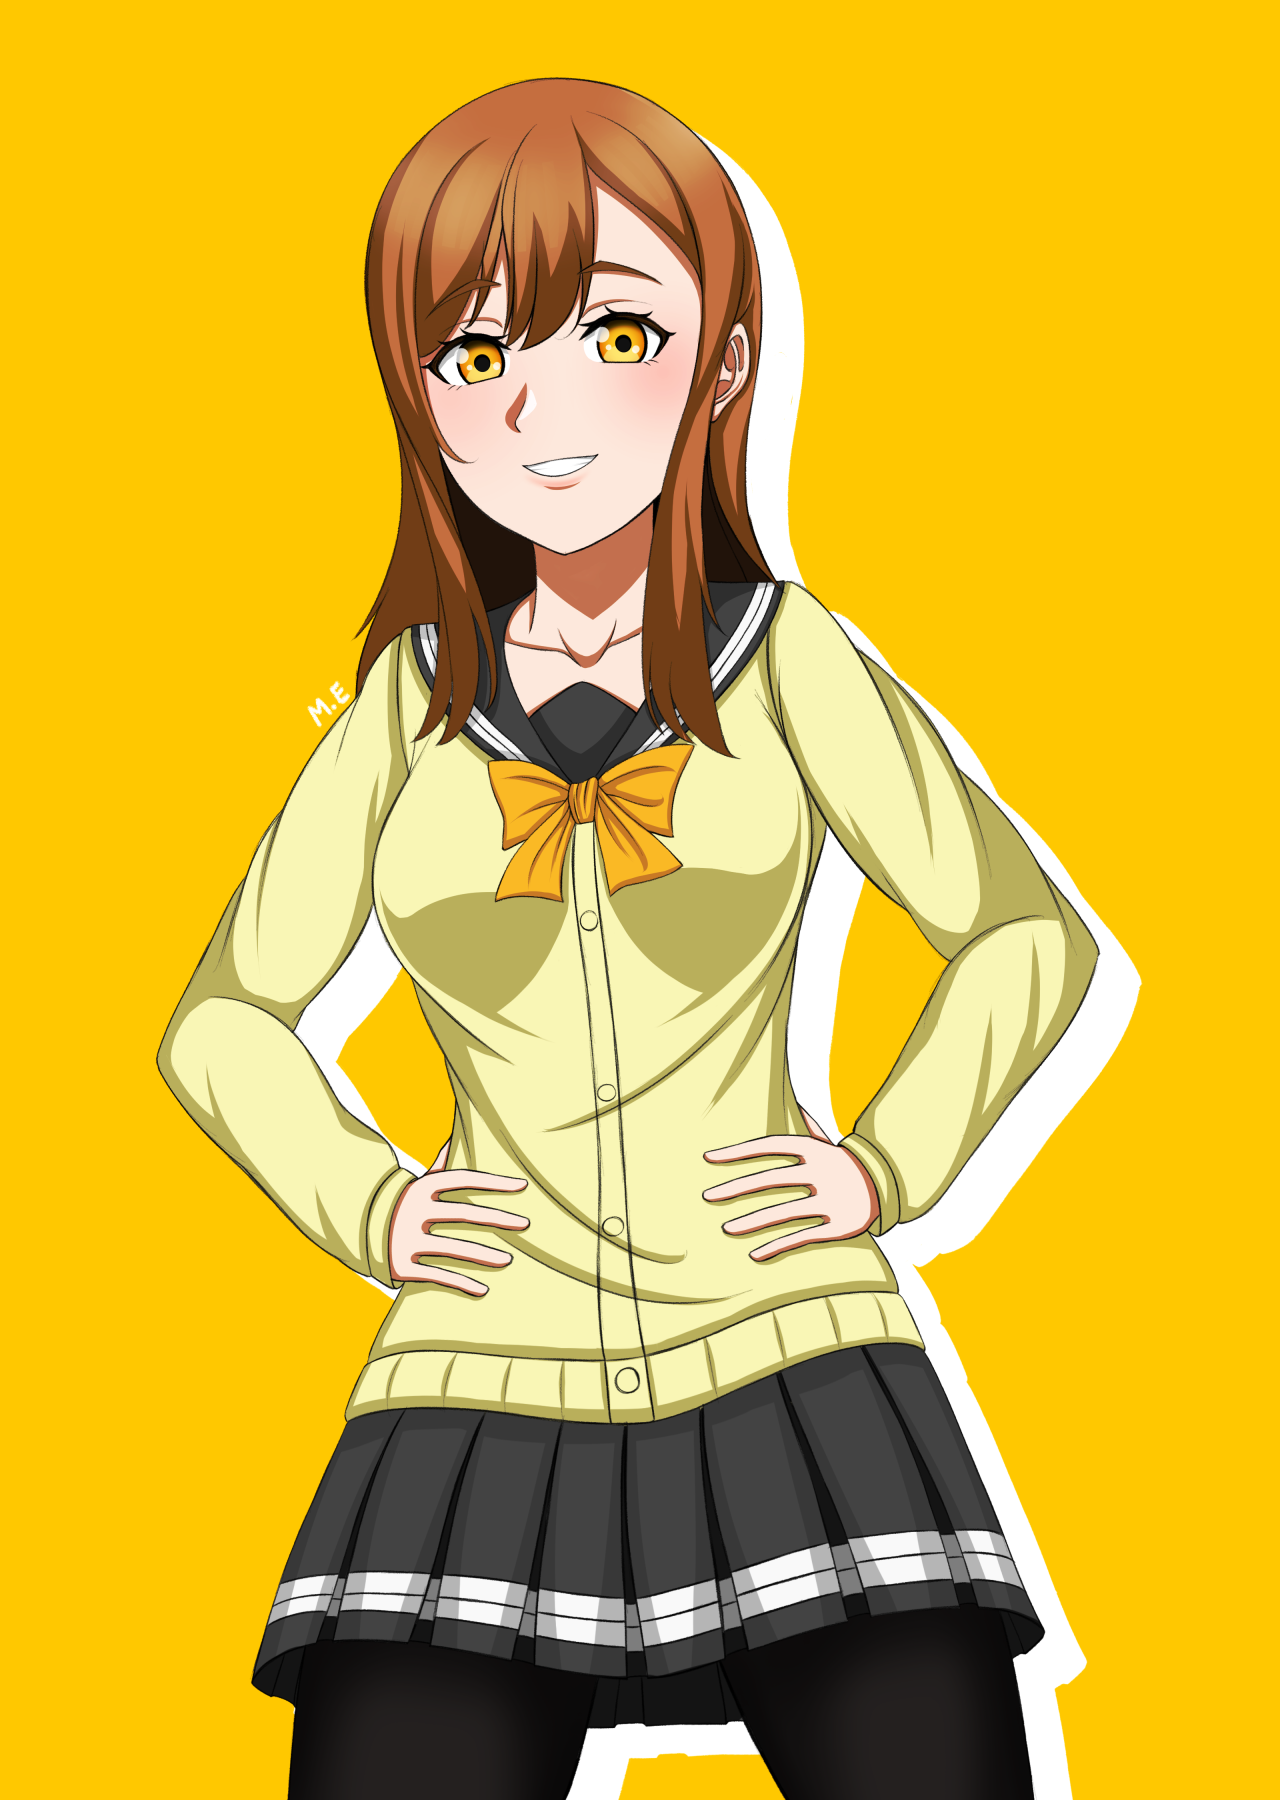 New Maru Drawing! I like to test how well I can draw my favourite characters every year to see how Im progressing. The new one up top is looking much better, still need to improve my hand-drawing skills xD #art#illustration #love live sunshine #love live#hanamaru kunikida #clip studio paint #国木田花丸#digital#digital art